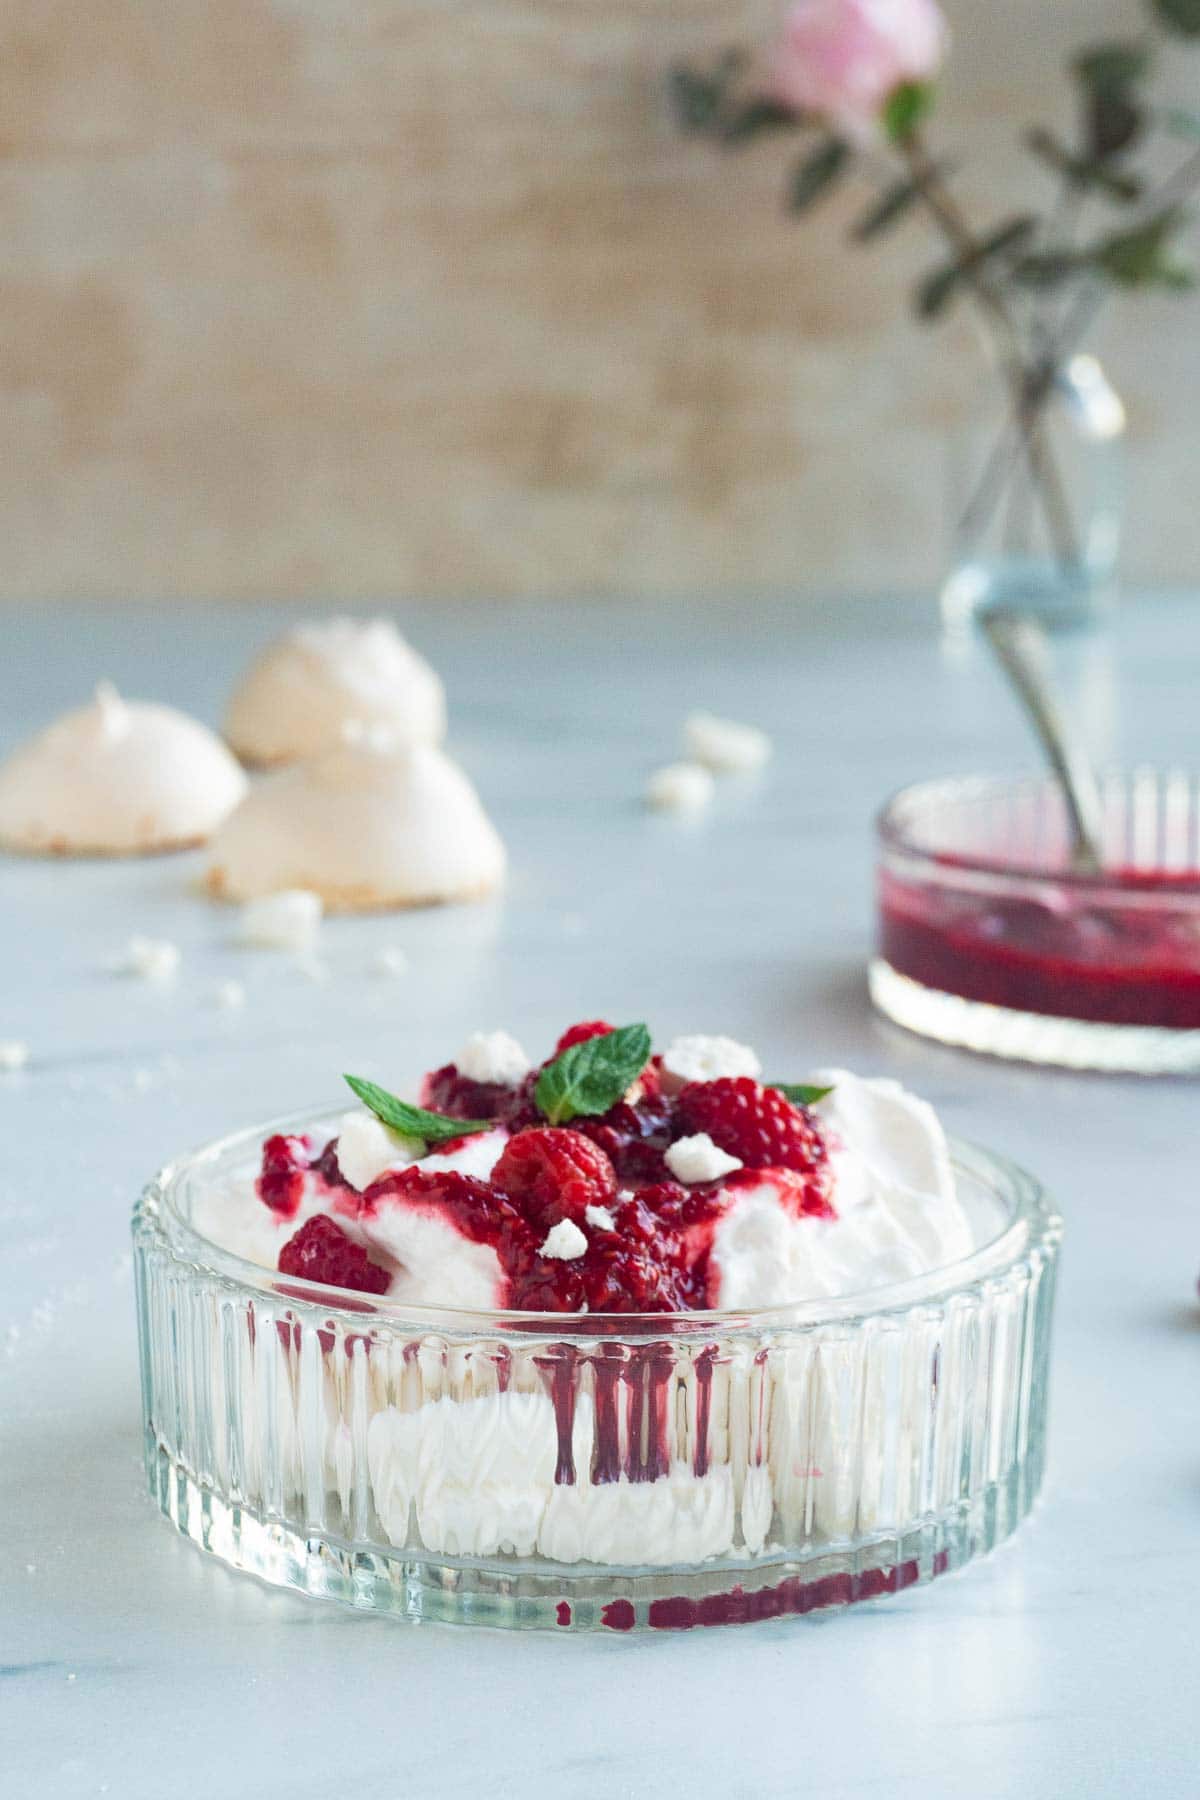 A side view of a Raspberry Eton Mess garnished with mint leaves.